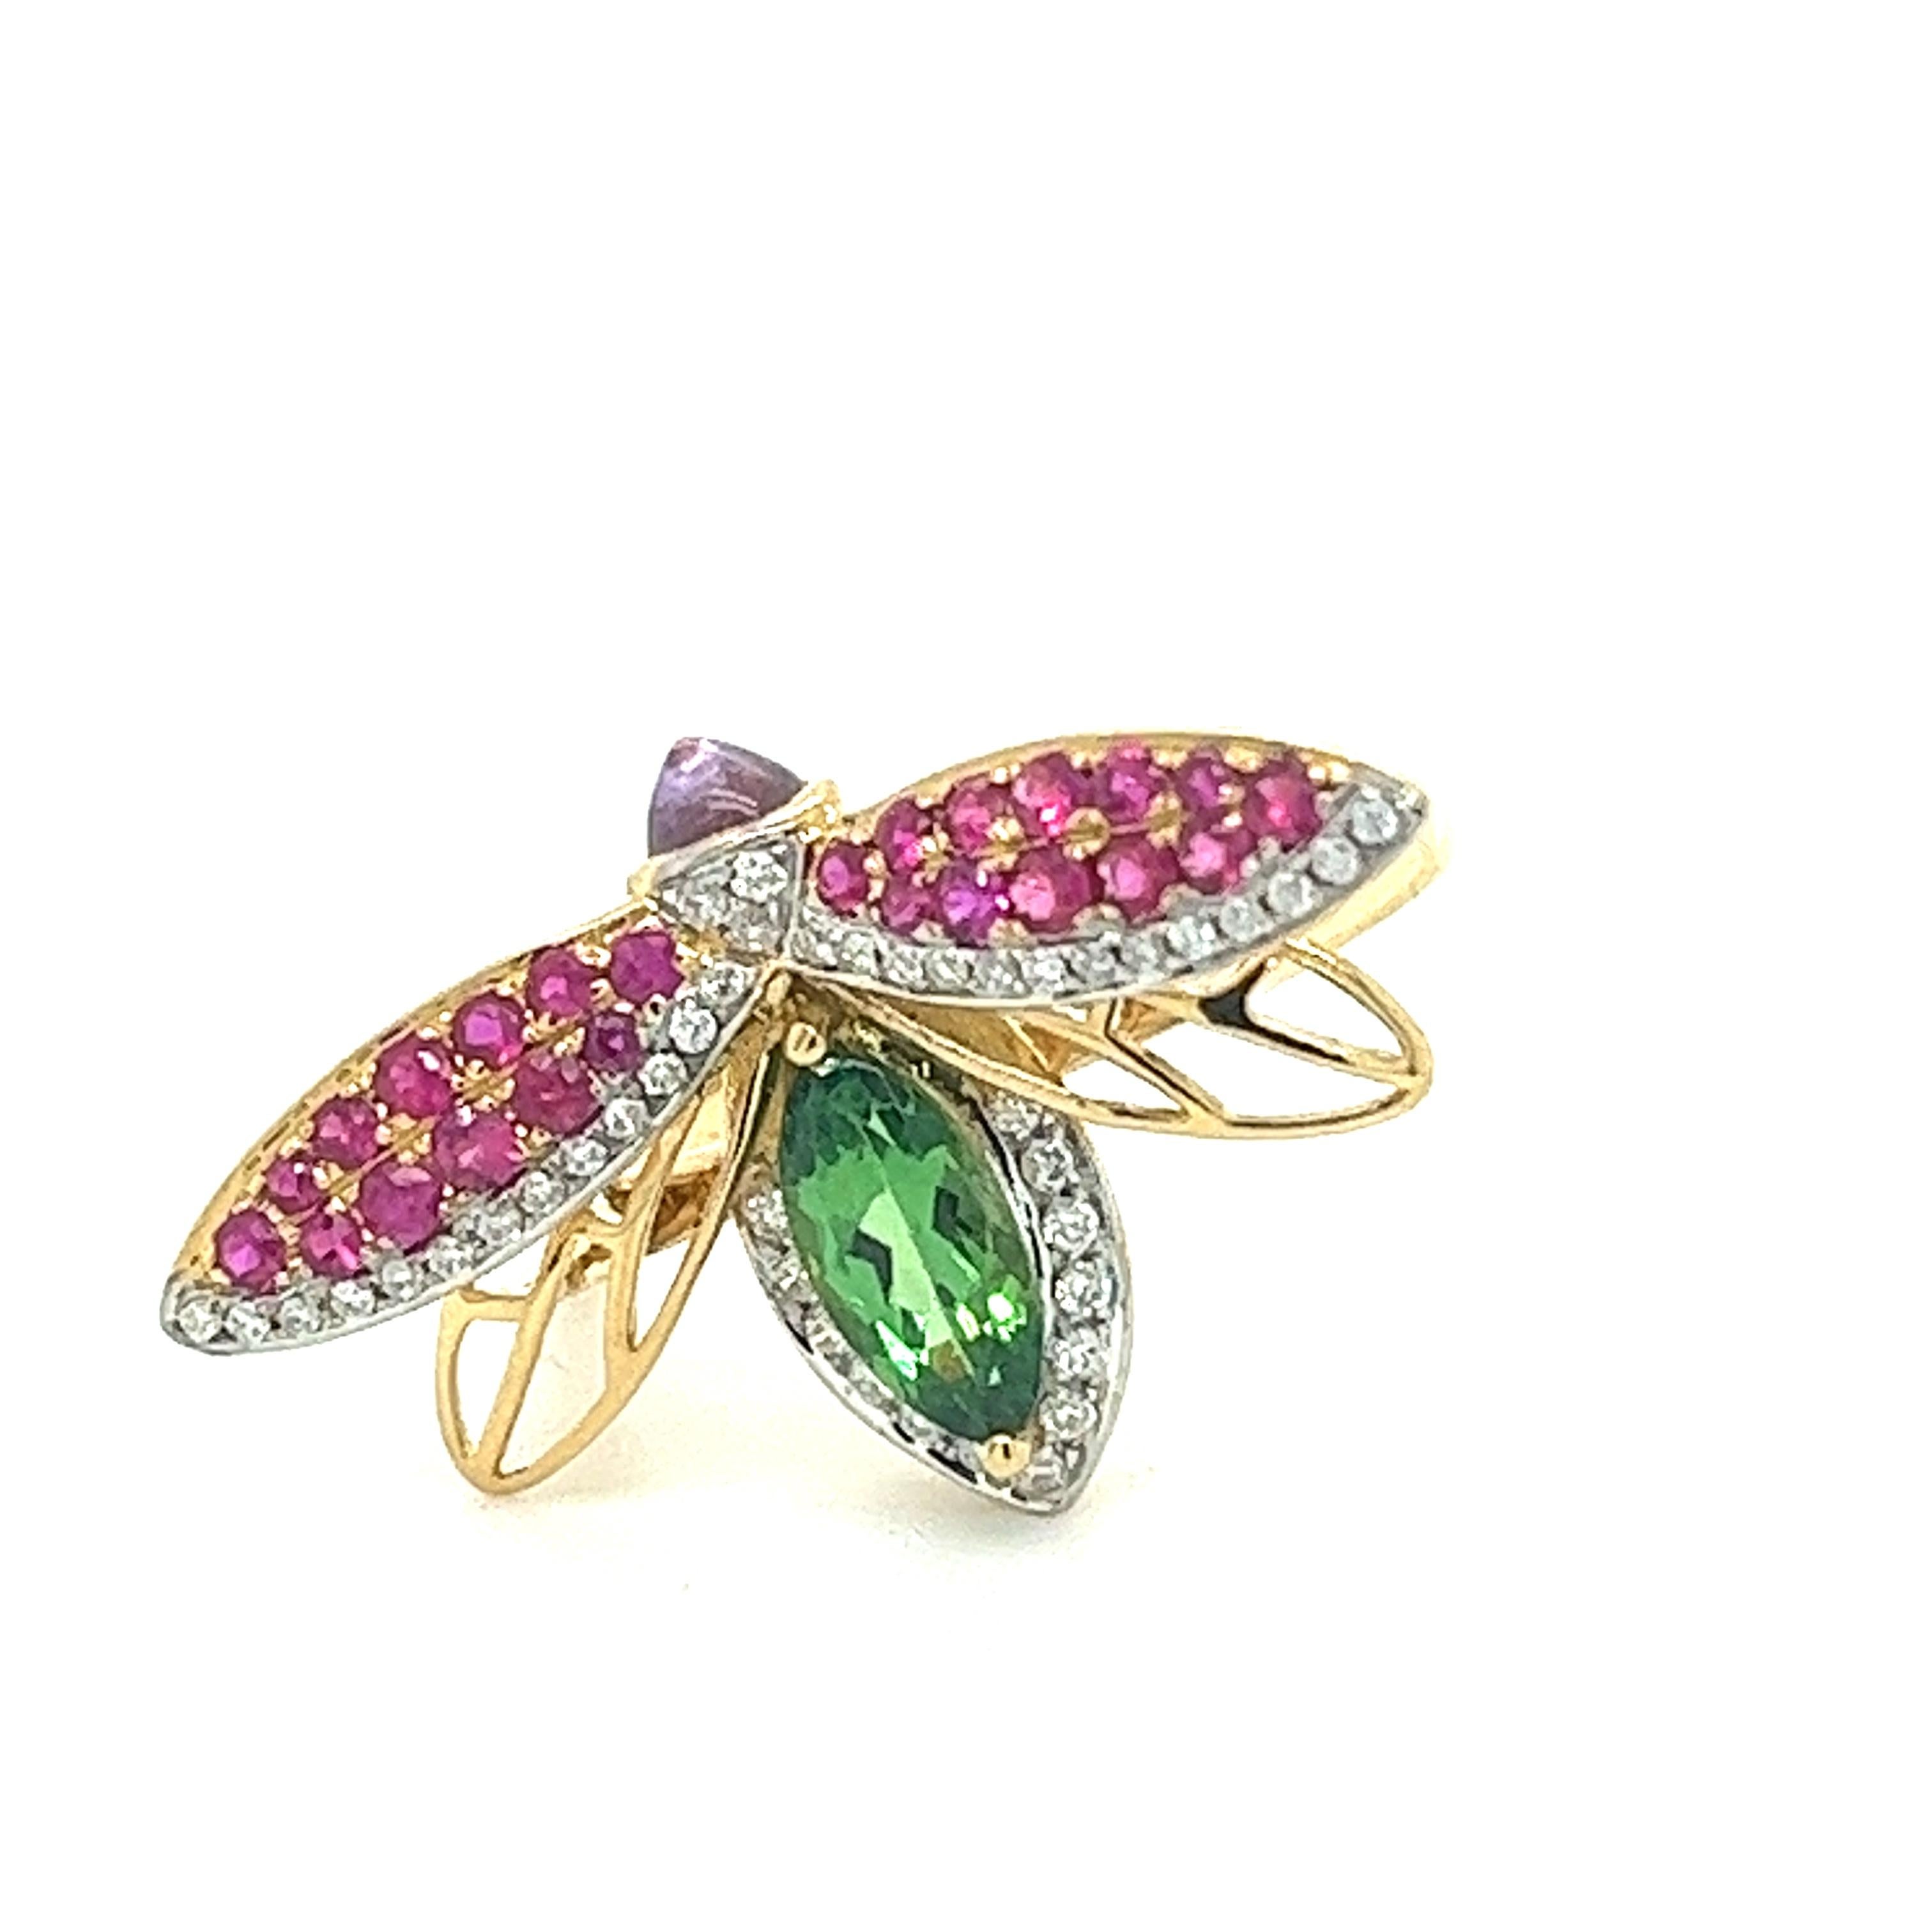 18K Yellow Gold Ladybug Ring with Diamonds & Rubies
43 Diamonds - 0.18 CT
1 Green Garnet - 0.68 CT
1 Purple Tourmaline - 0.26 CT
24 Rubies - 0.36 CT
18K Yellow Gold -  4.21 GM

Unleash the enchantment of nature's embrace with our exquisite 18K